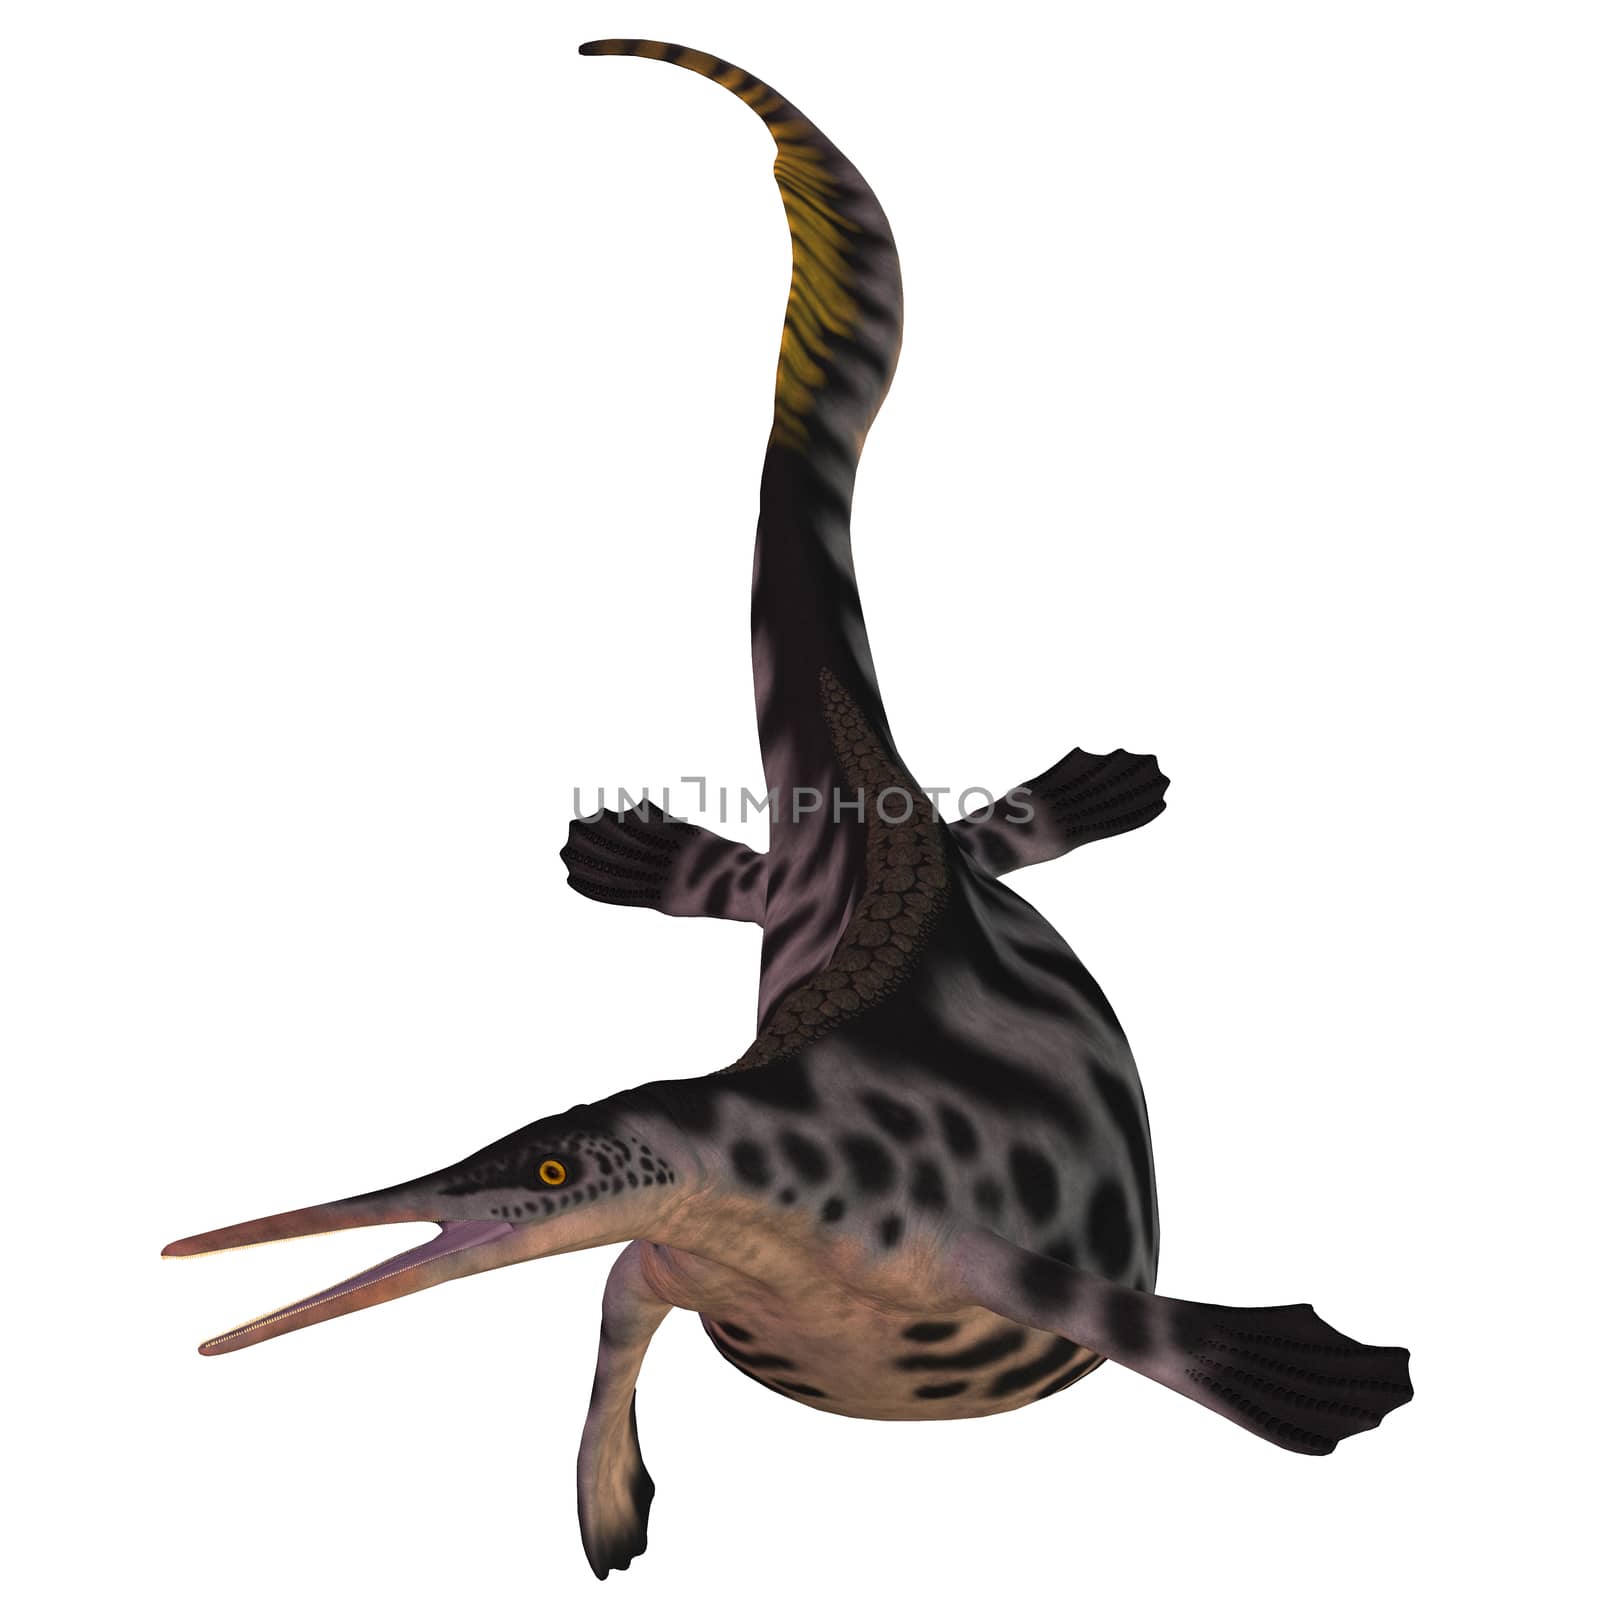 Hupehsuchus was a small genus of marine reptile found in China and lived in the Triassic Period. It may be related to the Ichthyosaur reptiles.